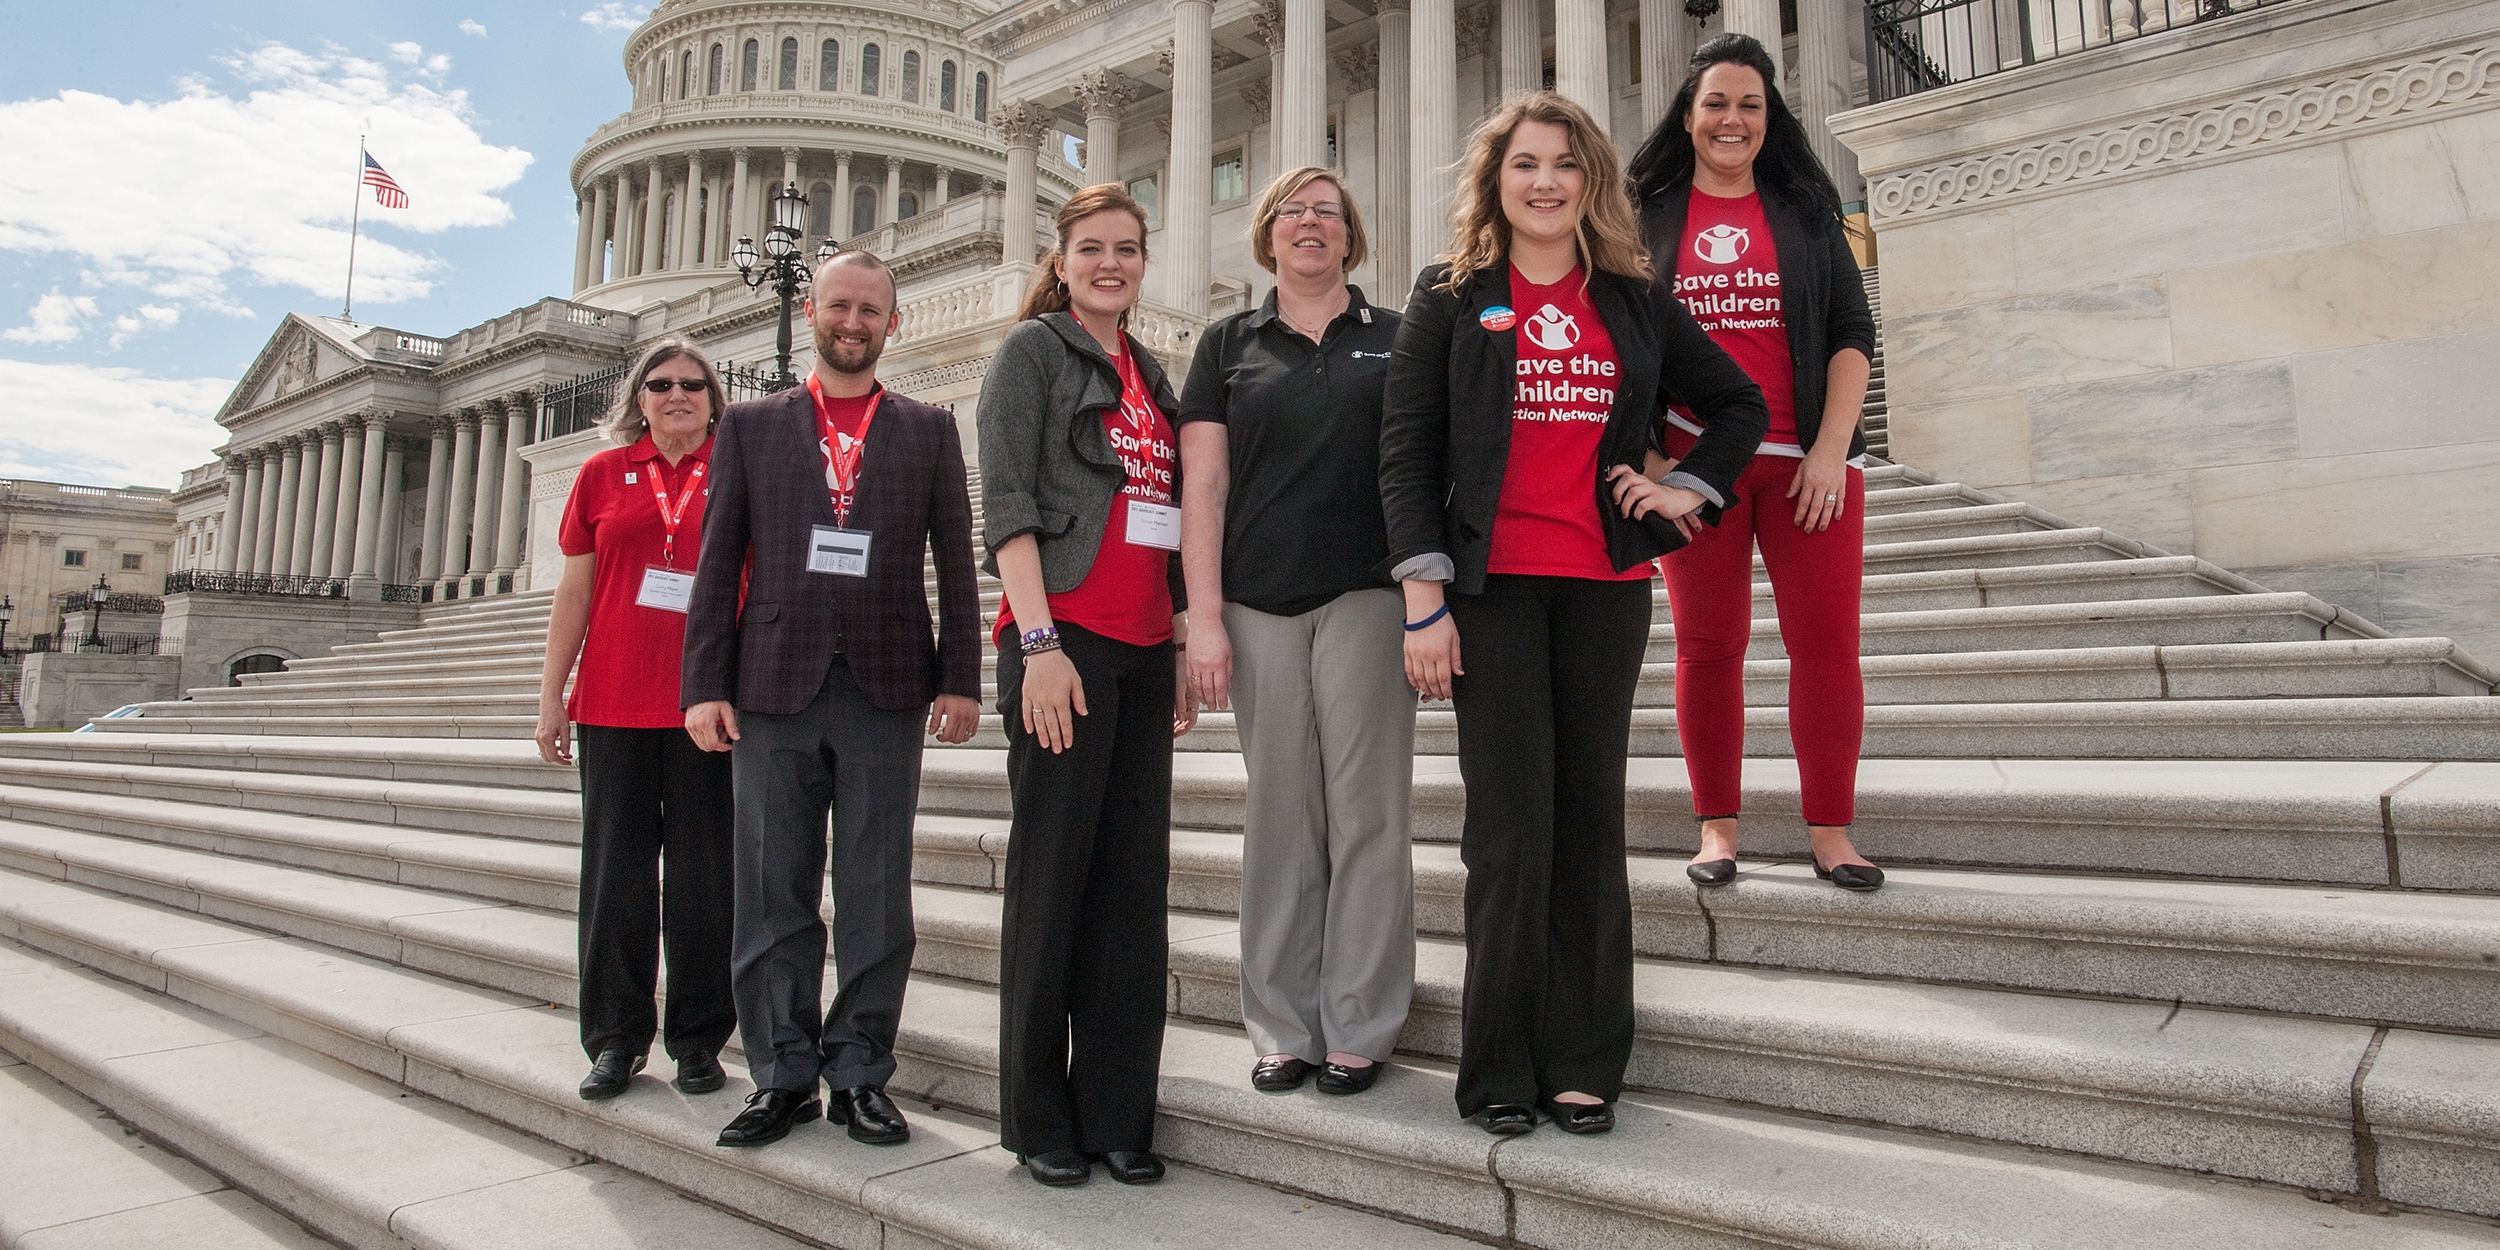 Save the Children staff pose on the steps near the capitol in Washington, D.C. during the 2017 Save the Children Advocacy Summit. Photo credit: Susan Warner/Save the Children, March 2017.